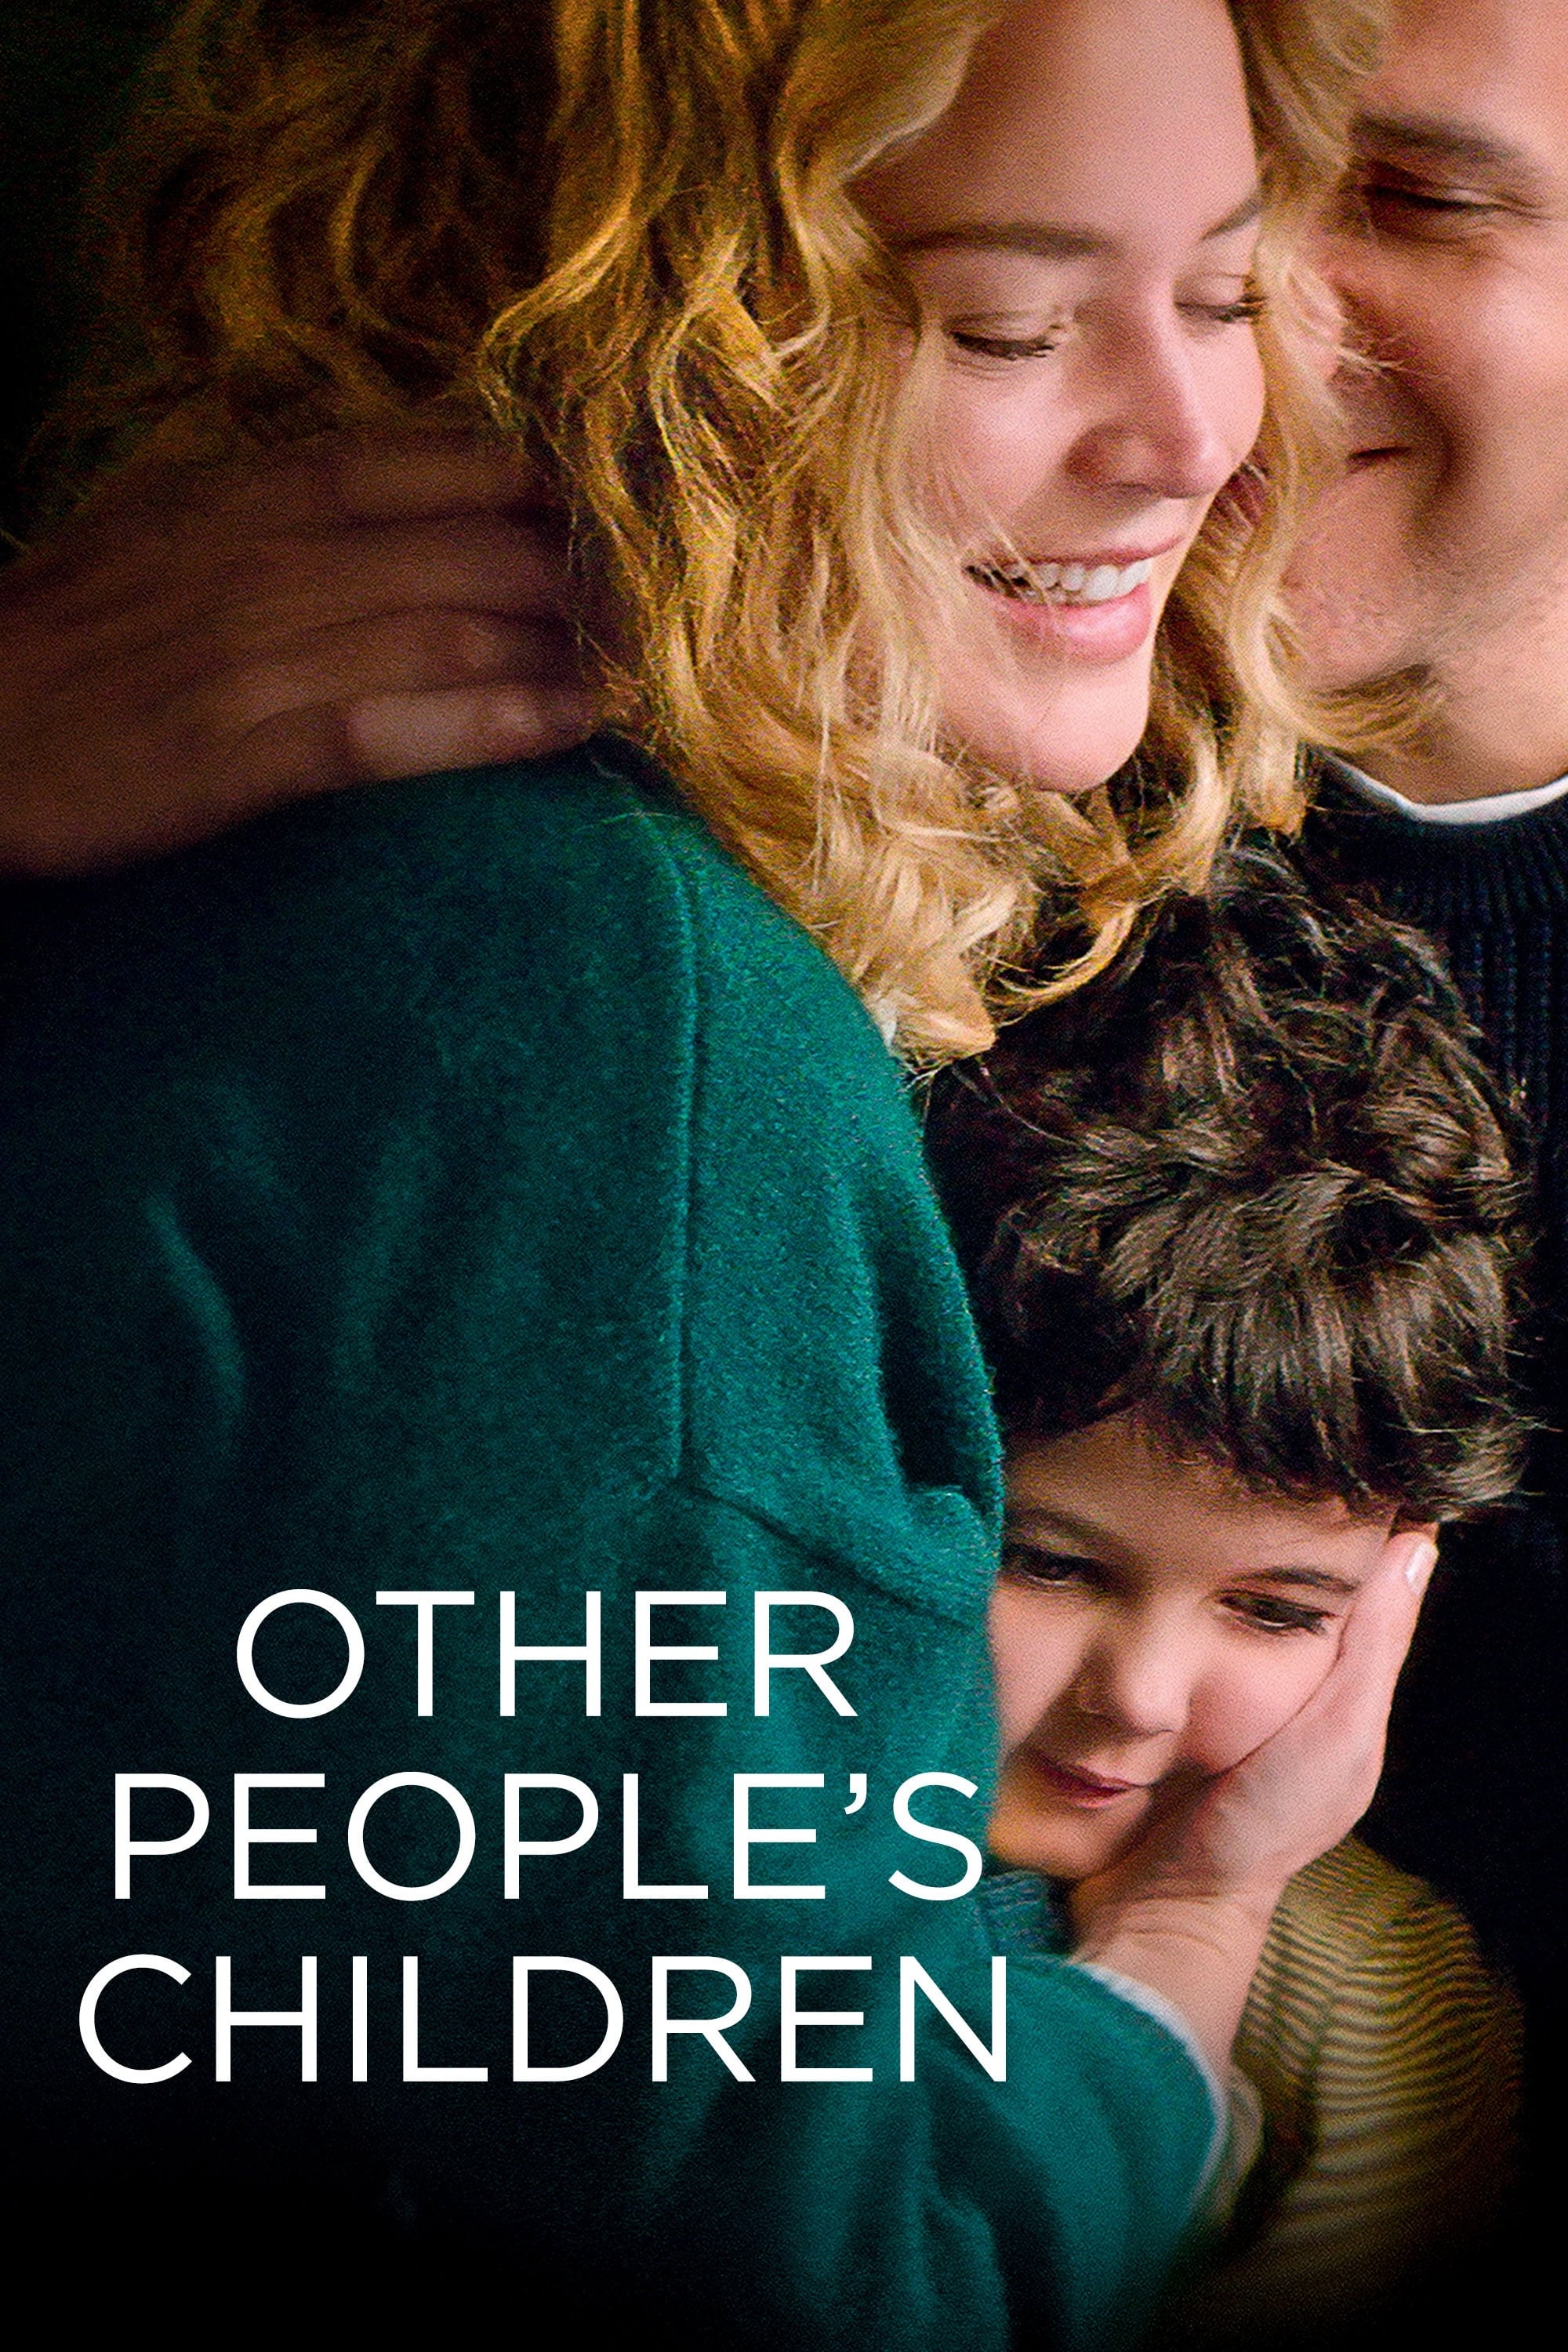 Other People's Children DVD Release